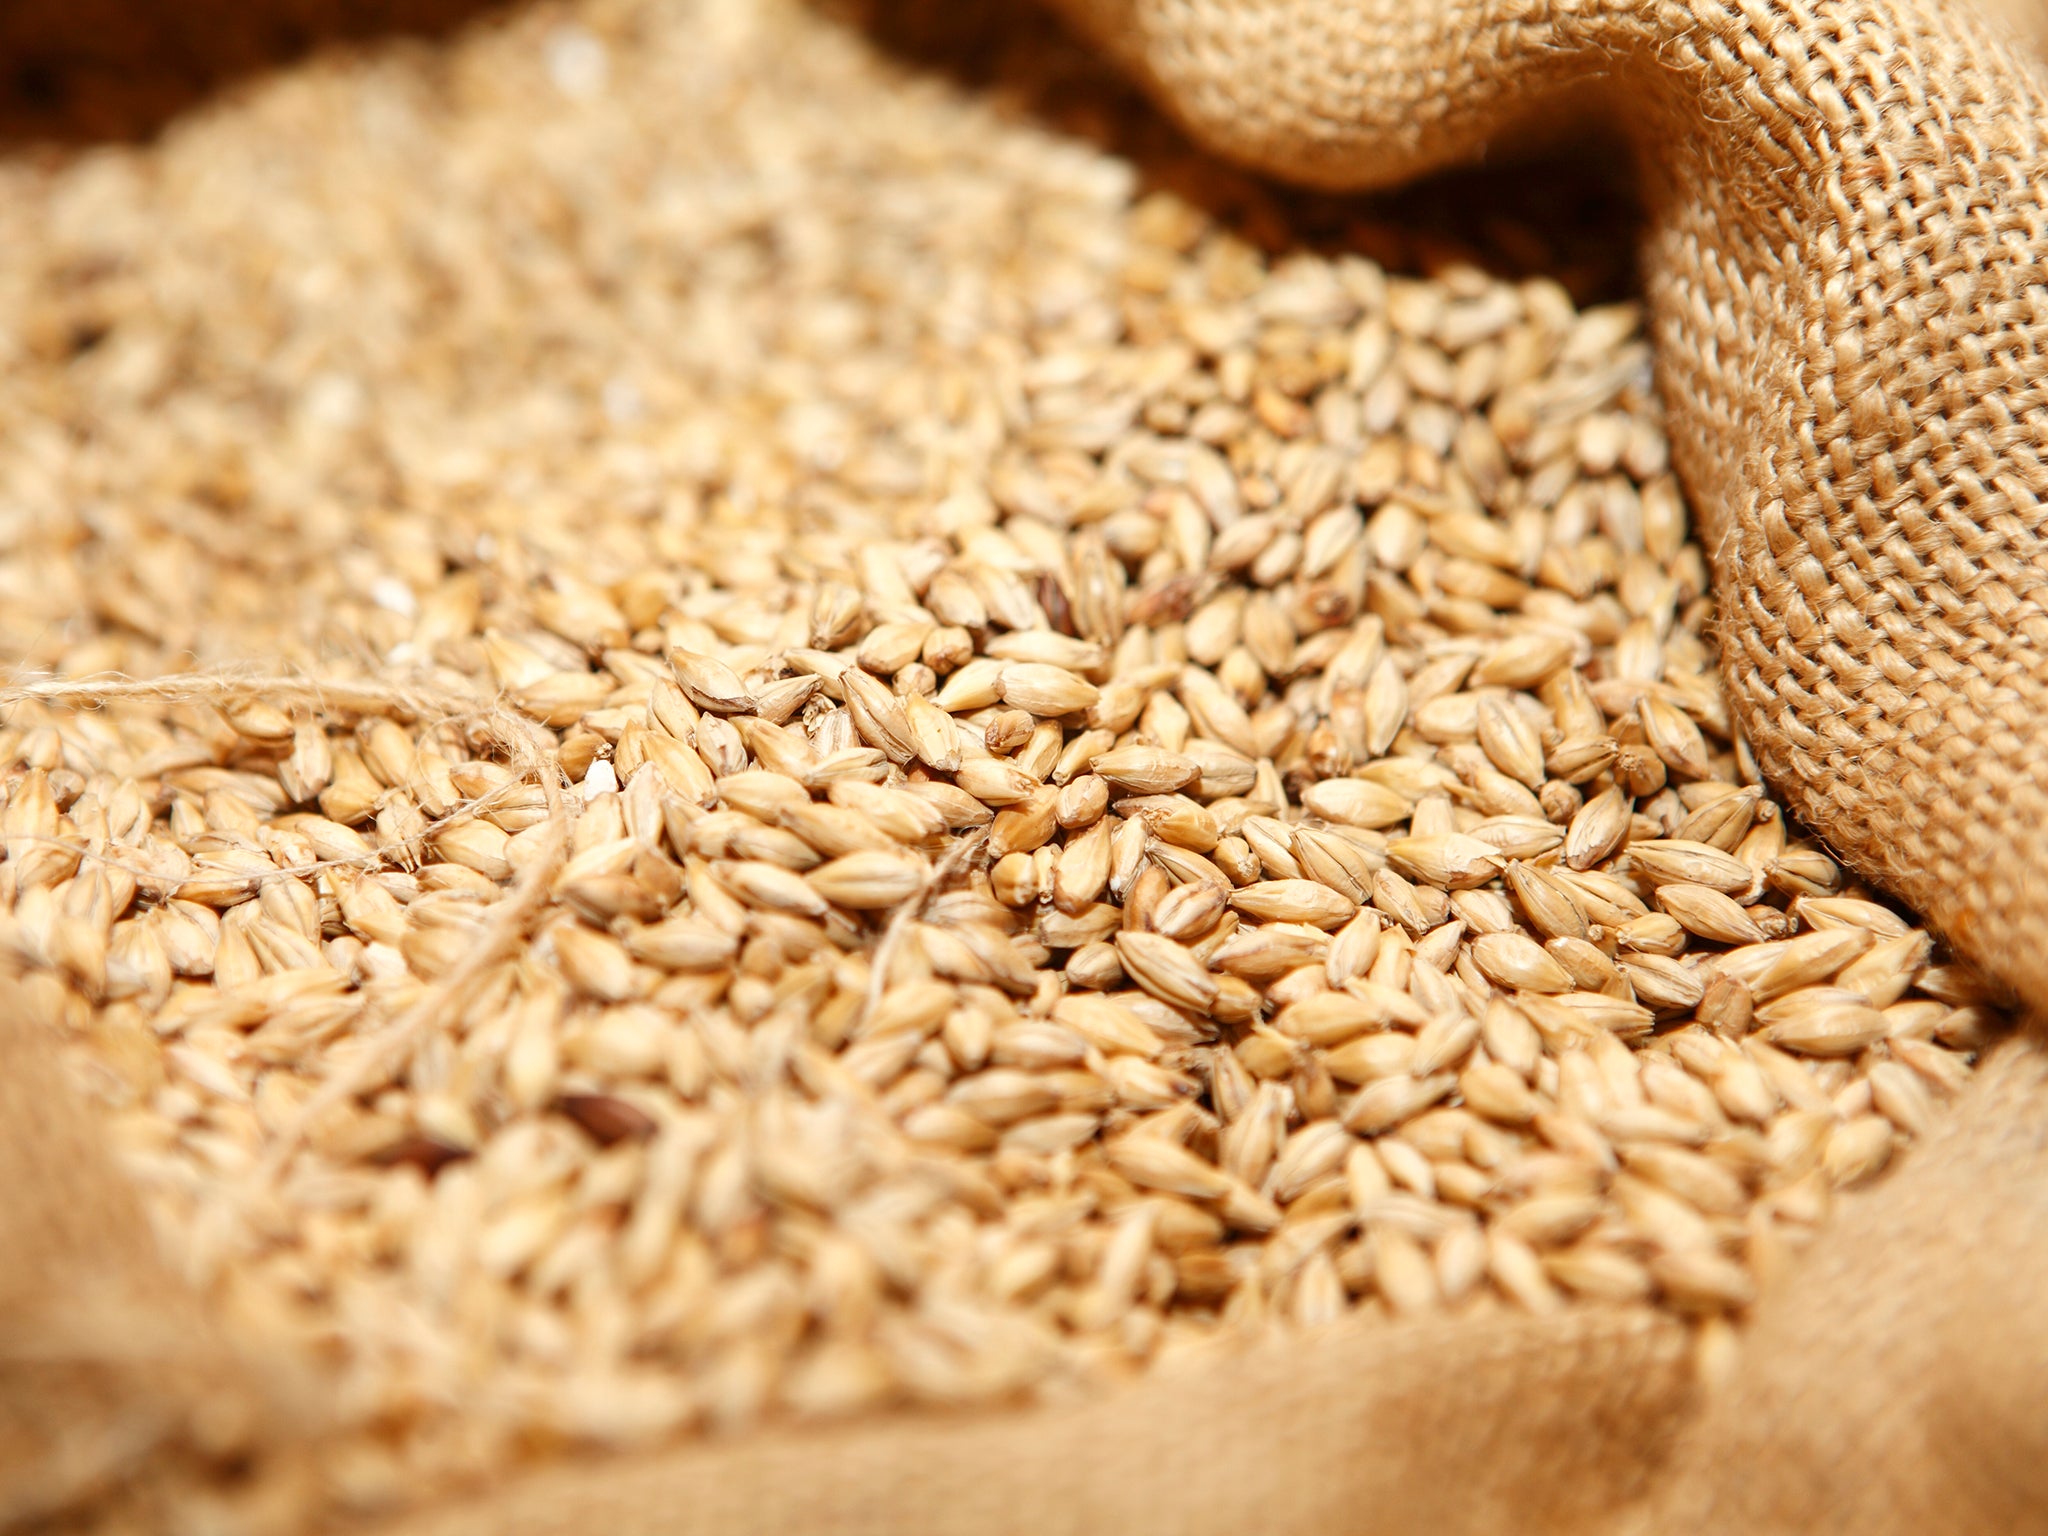 A large quantity of wheat was exchanged to 'settle' the case